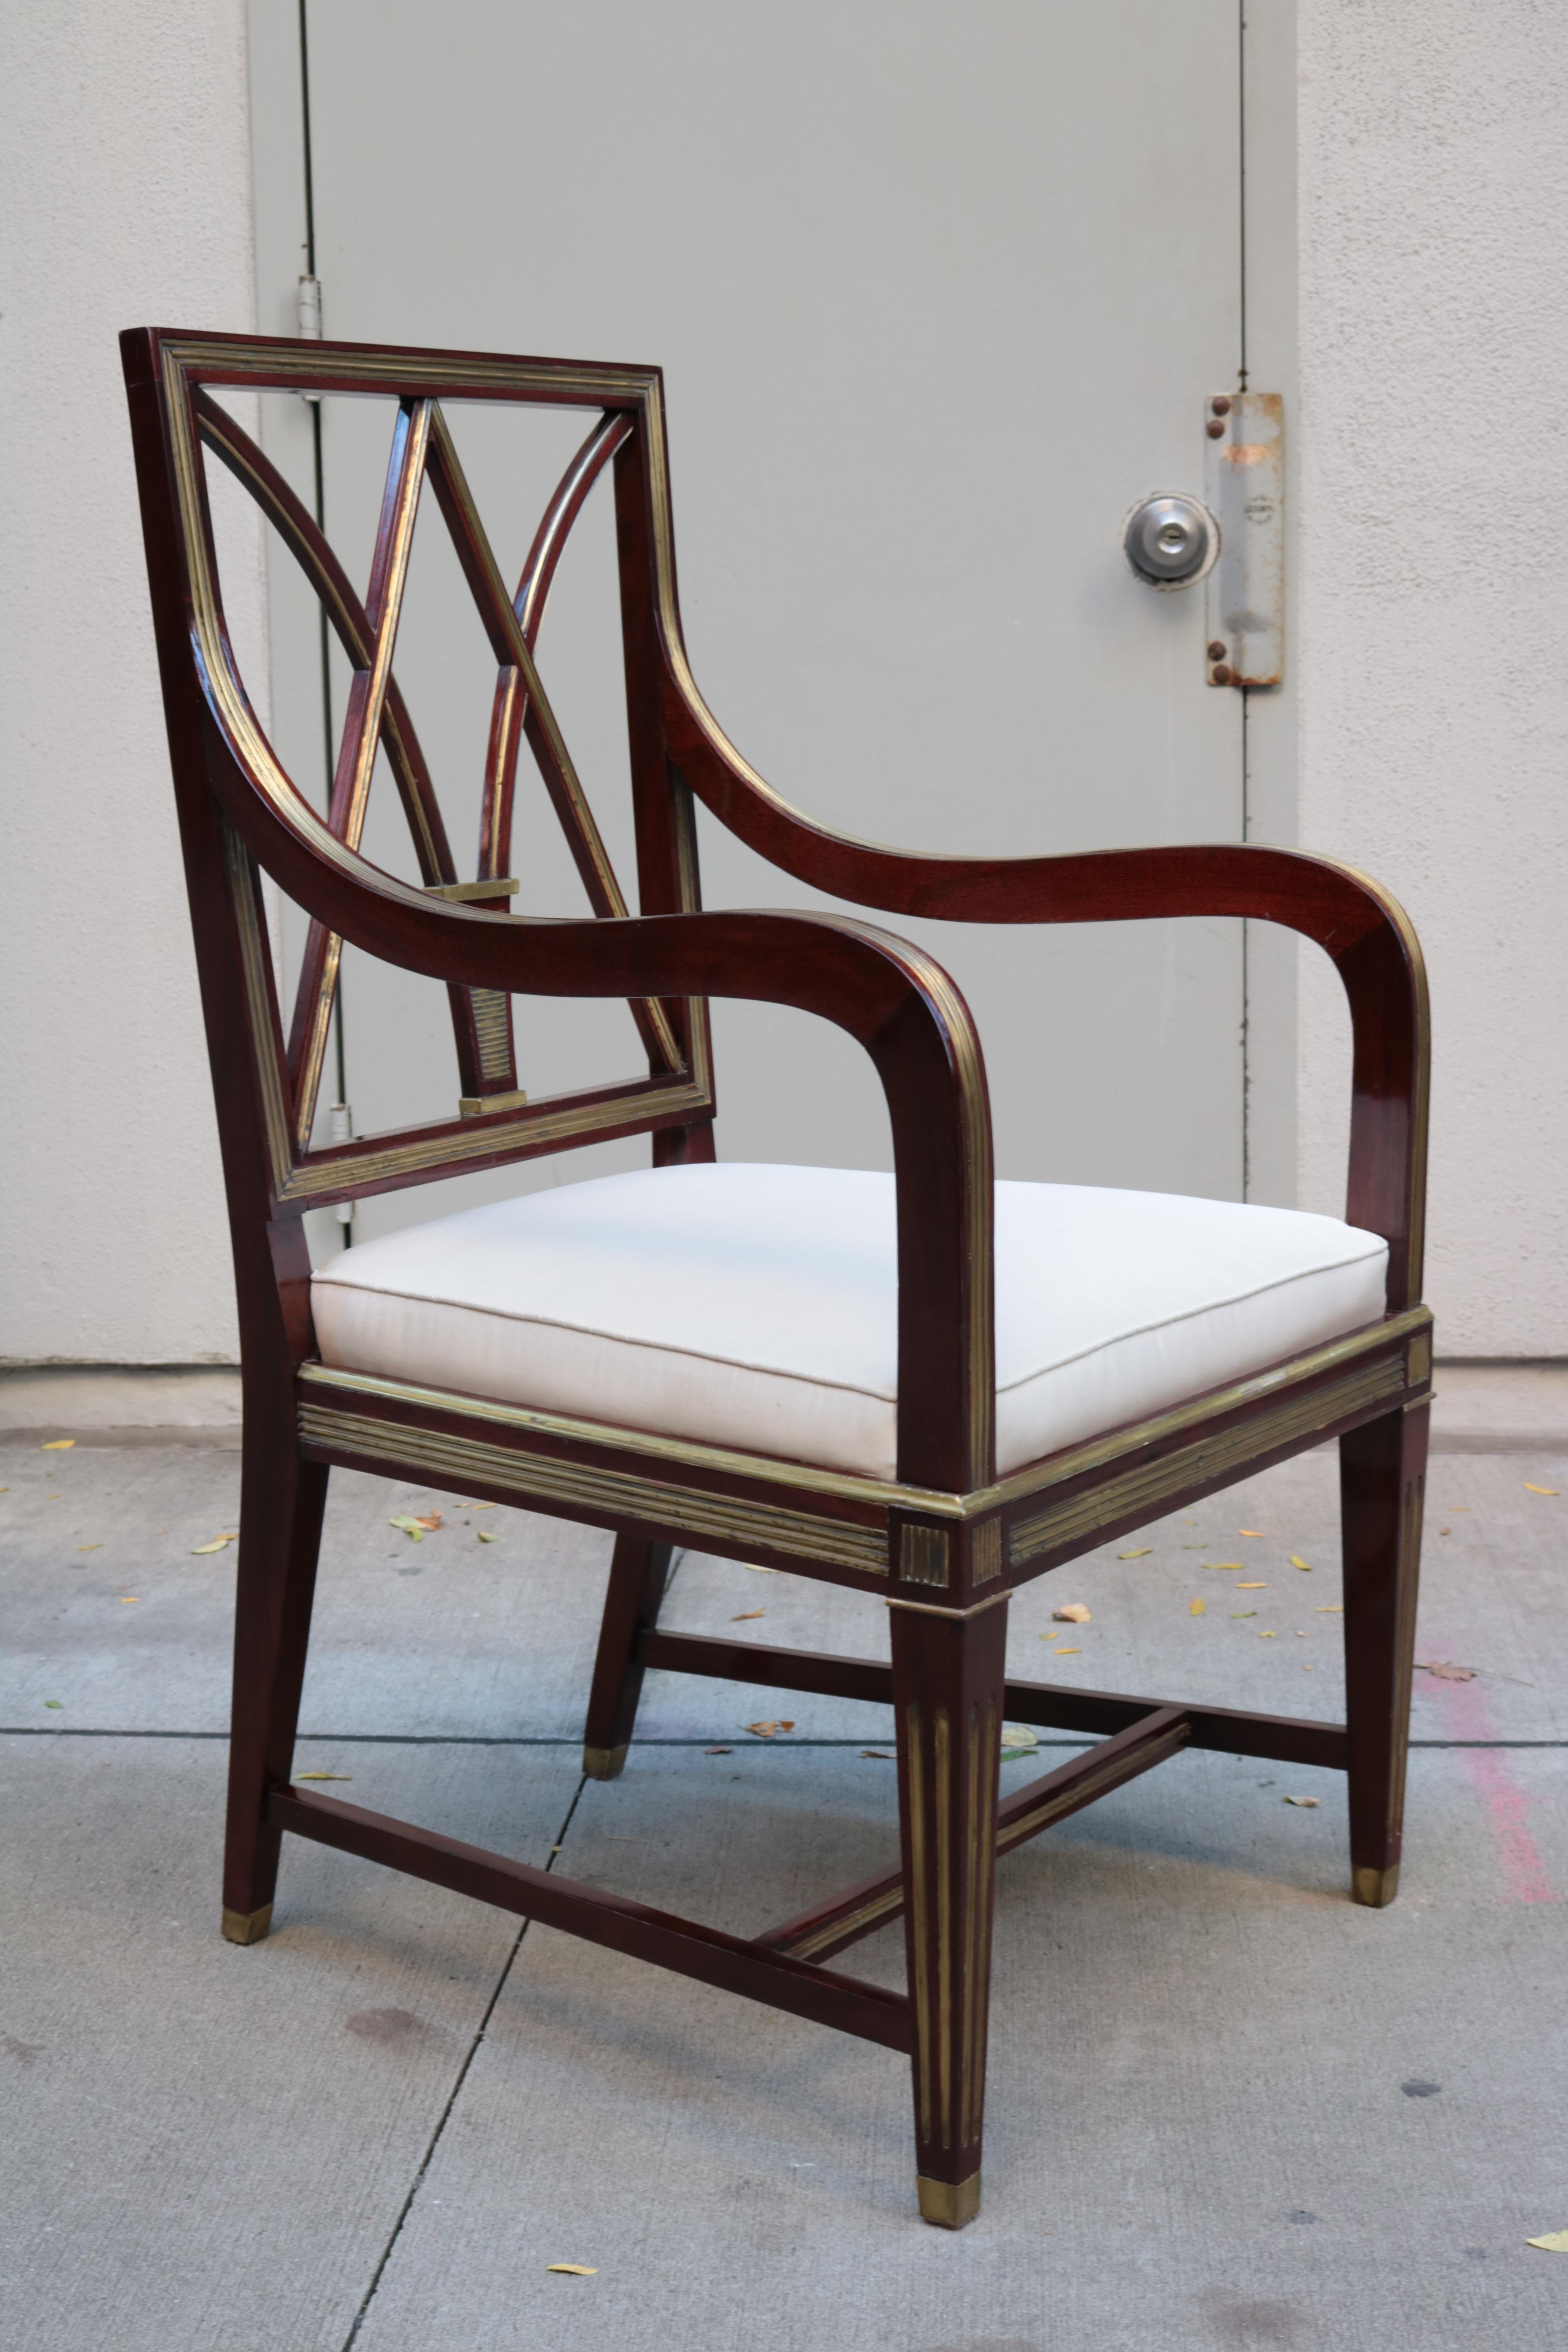 A fine neoclassical armchair.
Mahogany with patinated brass inlay, details and sabots.